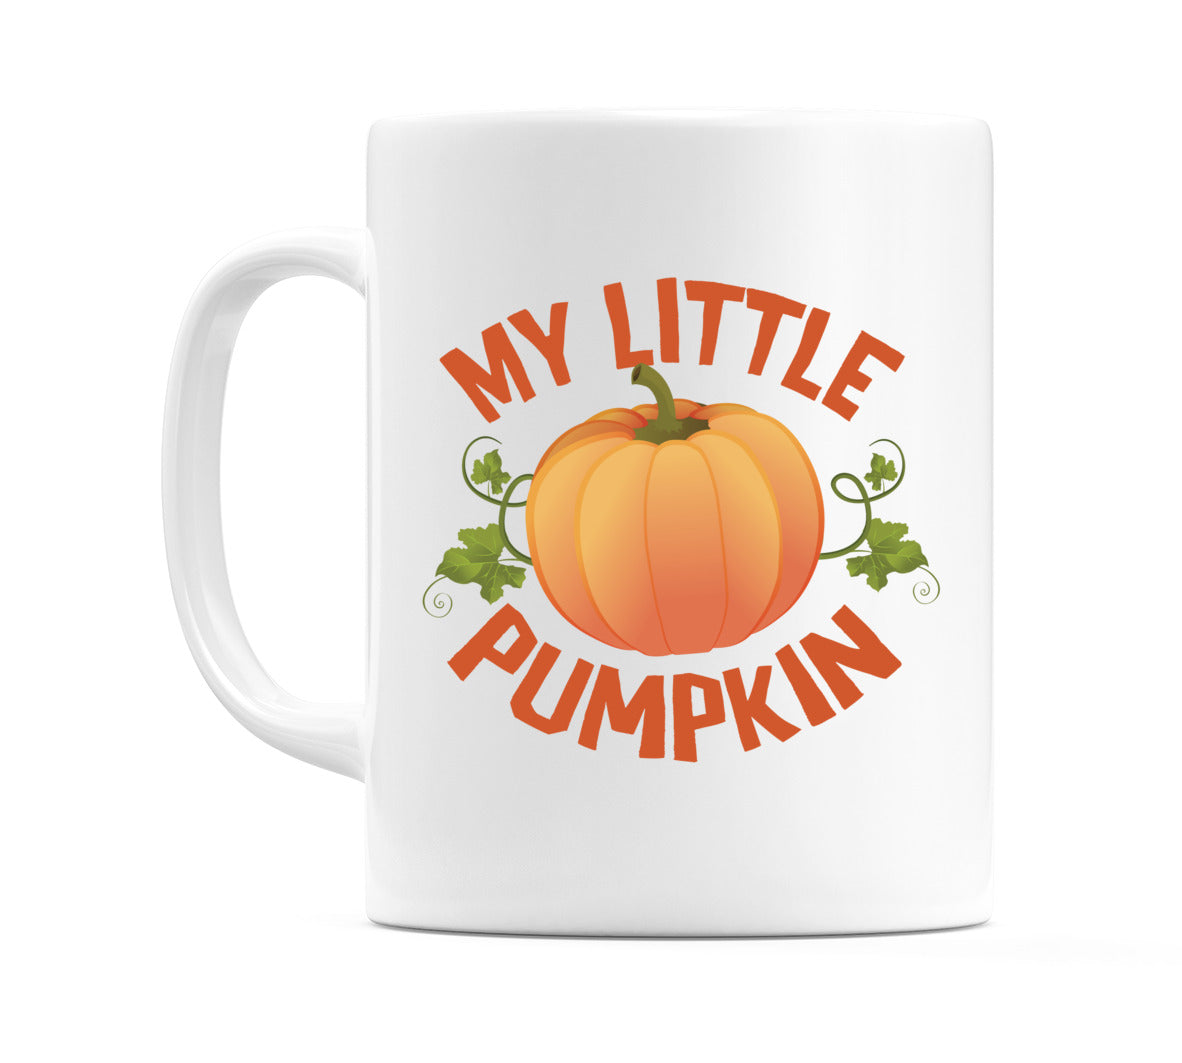 Text of My Little and then image of a Pumpkin and text pumpkin under it